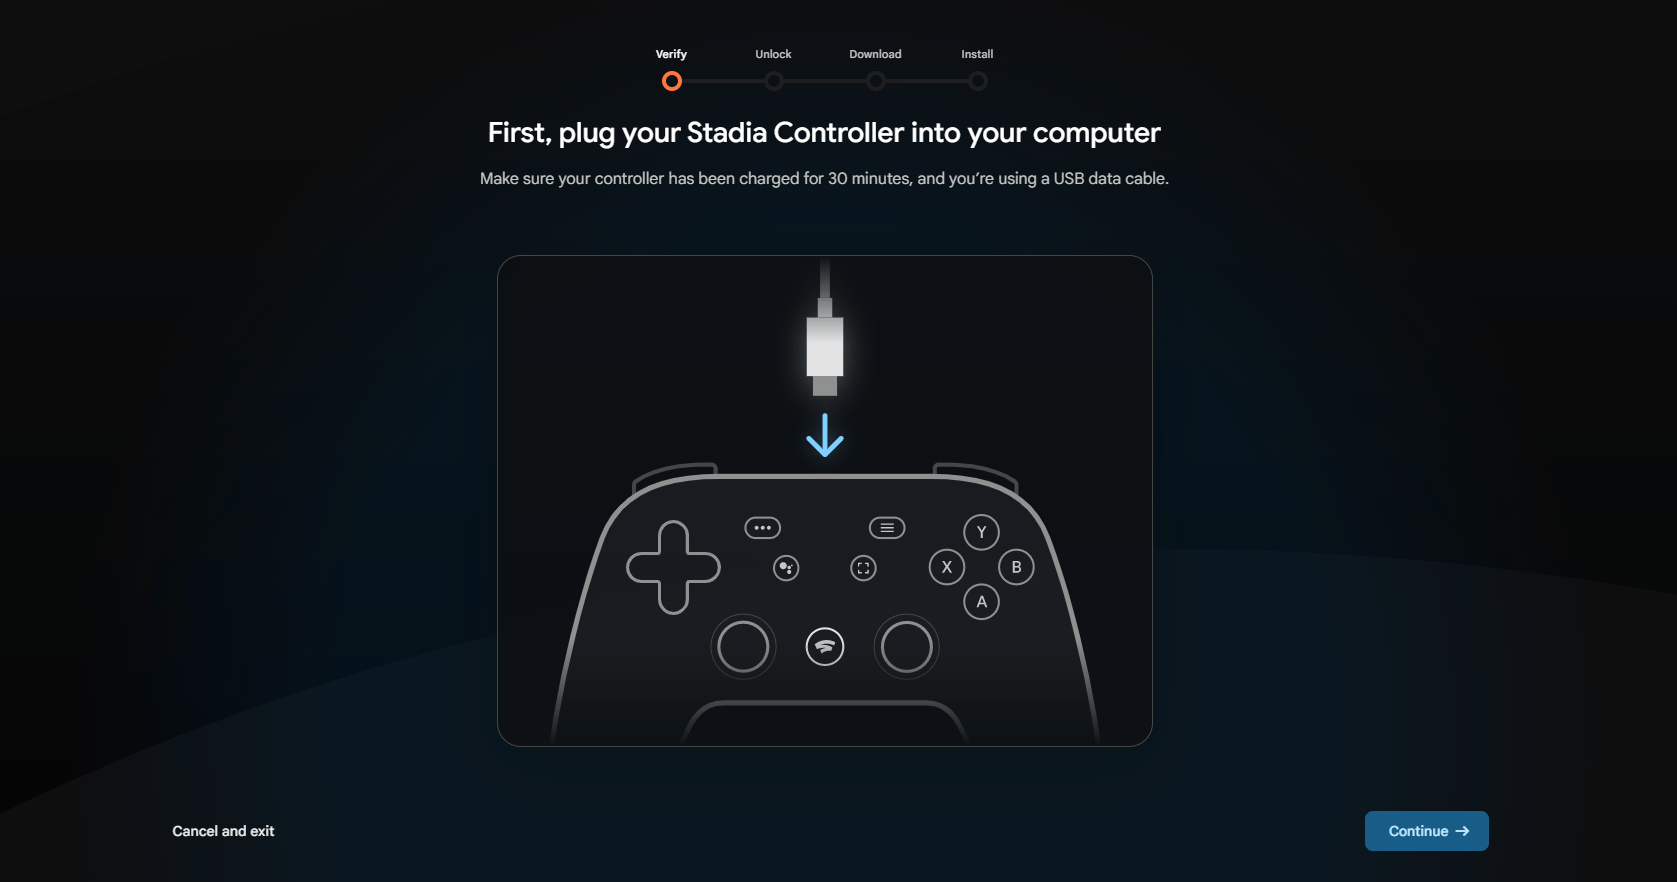 PLUG YOUR STADIA CONTROLLER